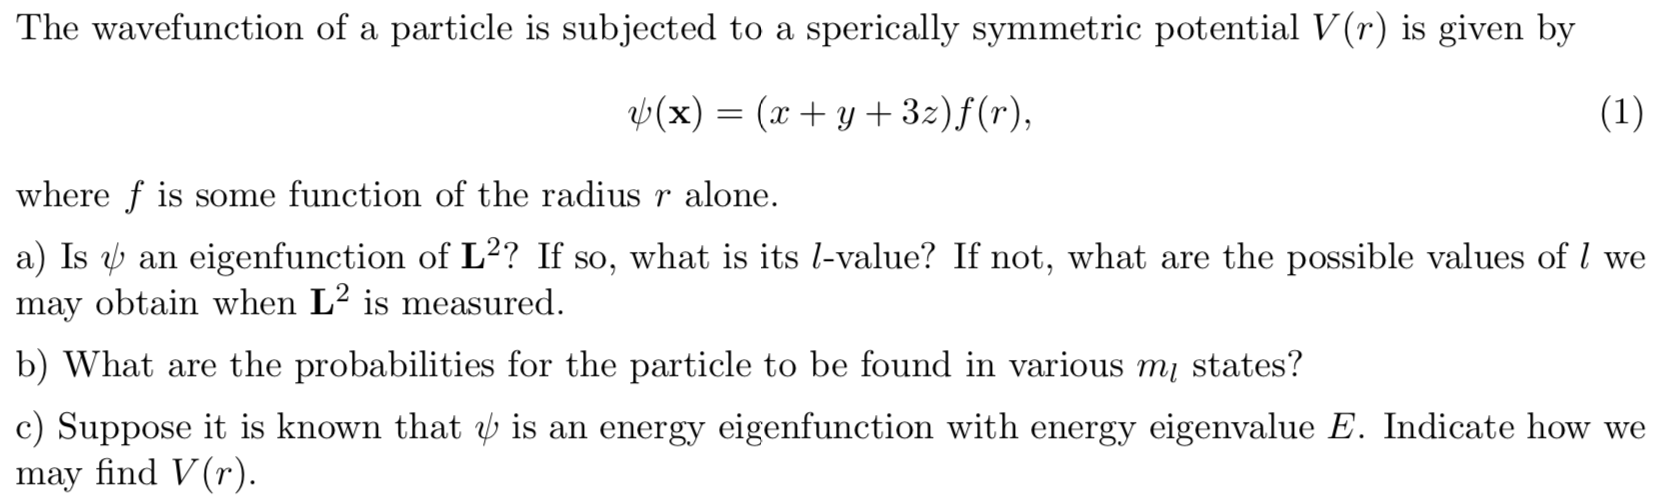 The wavefunction of a particle is subjected to a sperically symmetric potential V(r) is given by
b(x)= (xy 32)f(r),
(1)
where f is some function of the radius r alone.
a) Is an eigenfunction of L2? If so, what is its l-value? If not, what are the possible values of / we
may obtain when L2 is measured.
b) What are the probabilities for the particle to be found in various m states?
c) Suppose it is known that b is an energy eigenfunction with energy eigenvalue E. Indicate how we
may find V(r).
